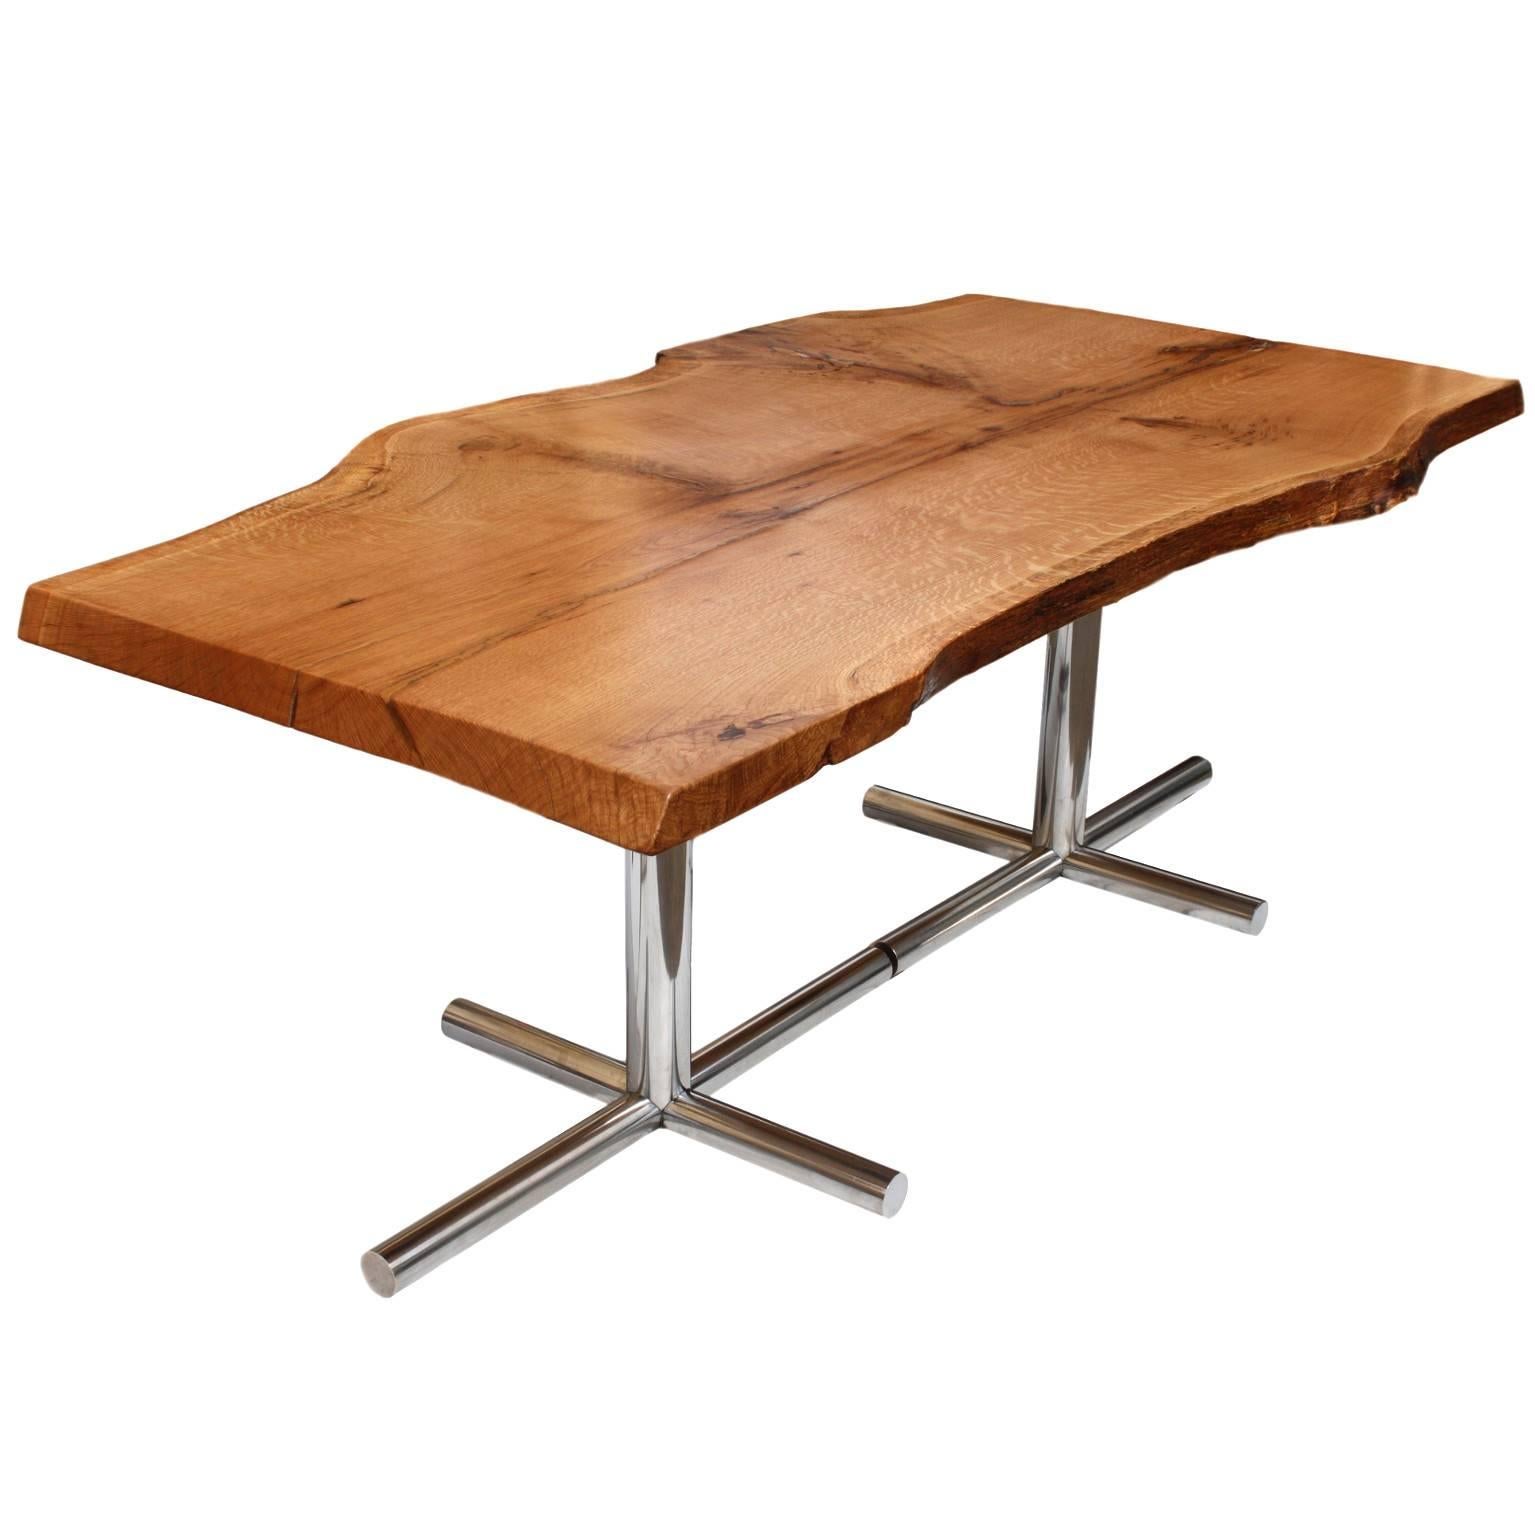 Solid Live-Edge Oak Dining Table with Vintage Mid-Century Modern Chrome Legs